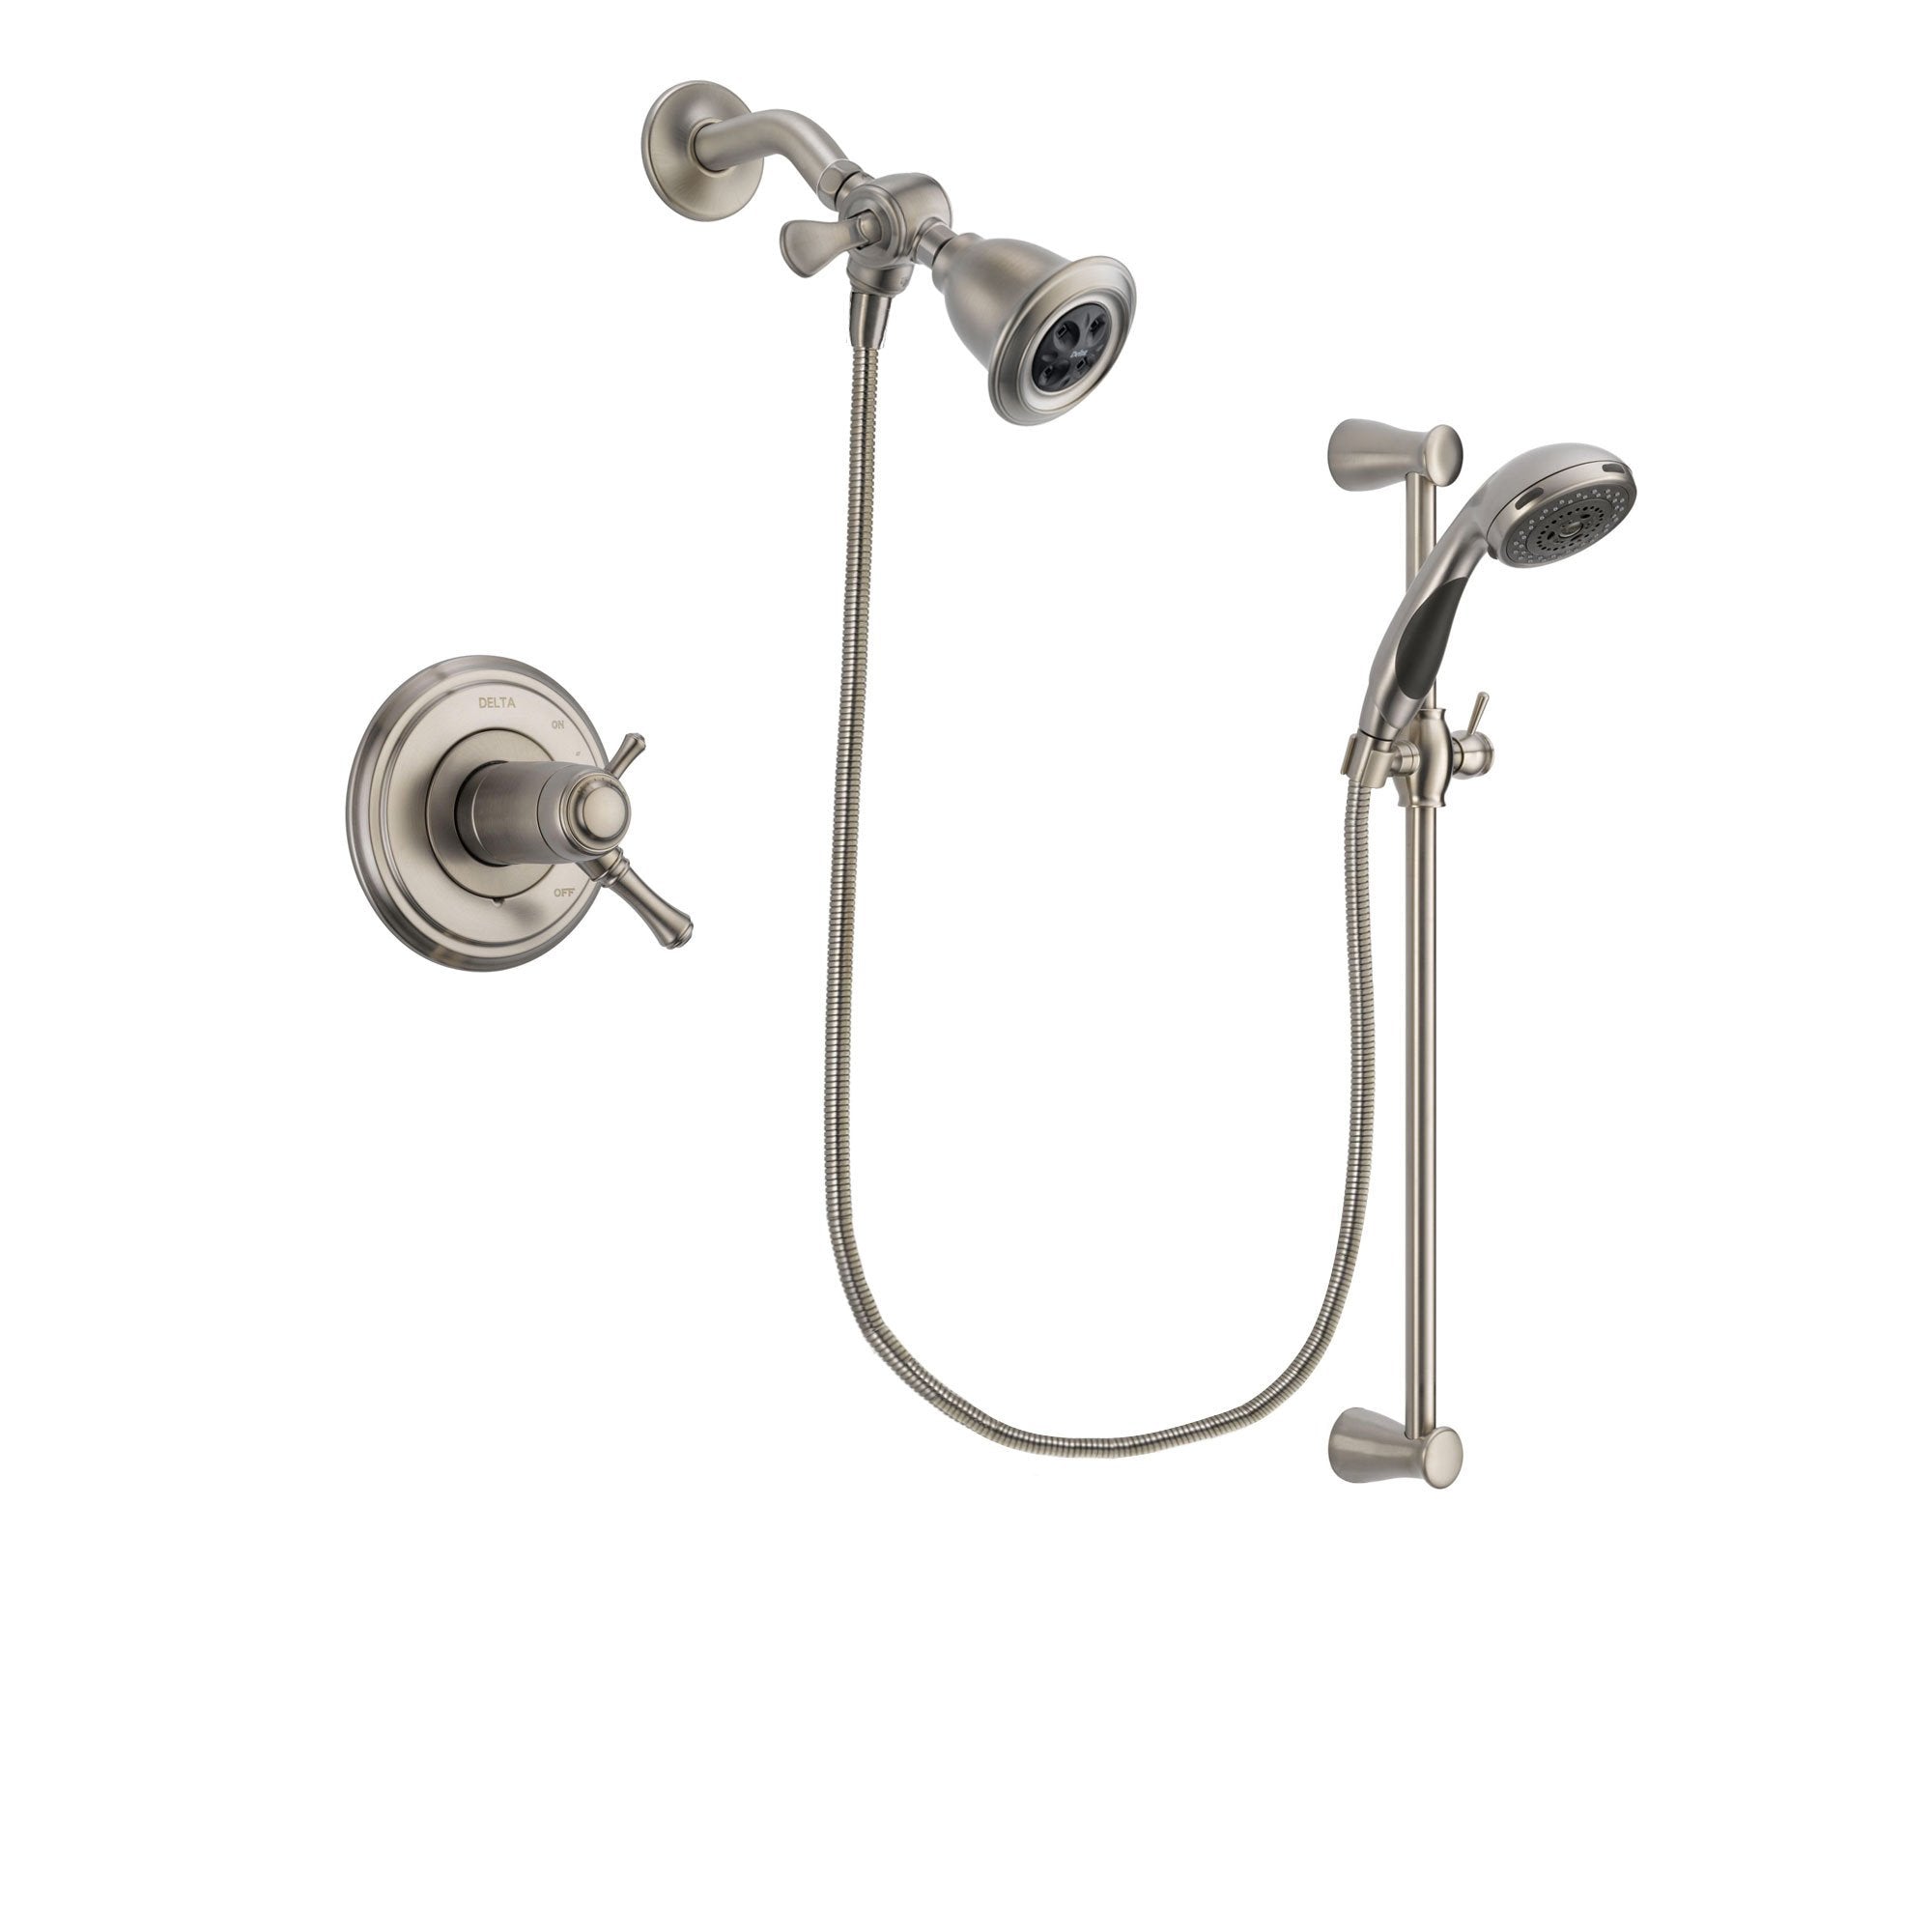 Delta Cassidy Stainless Steel Finish Thermostatic Shower Faucet System Package with Water Efficient Showerhead and Handheld Shower Spray with Slide Bar Includes Rough-in Valve DSP1556V